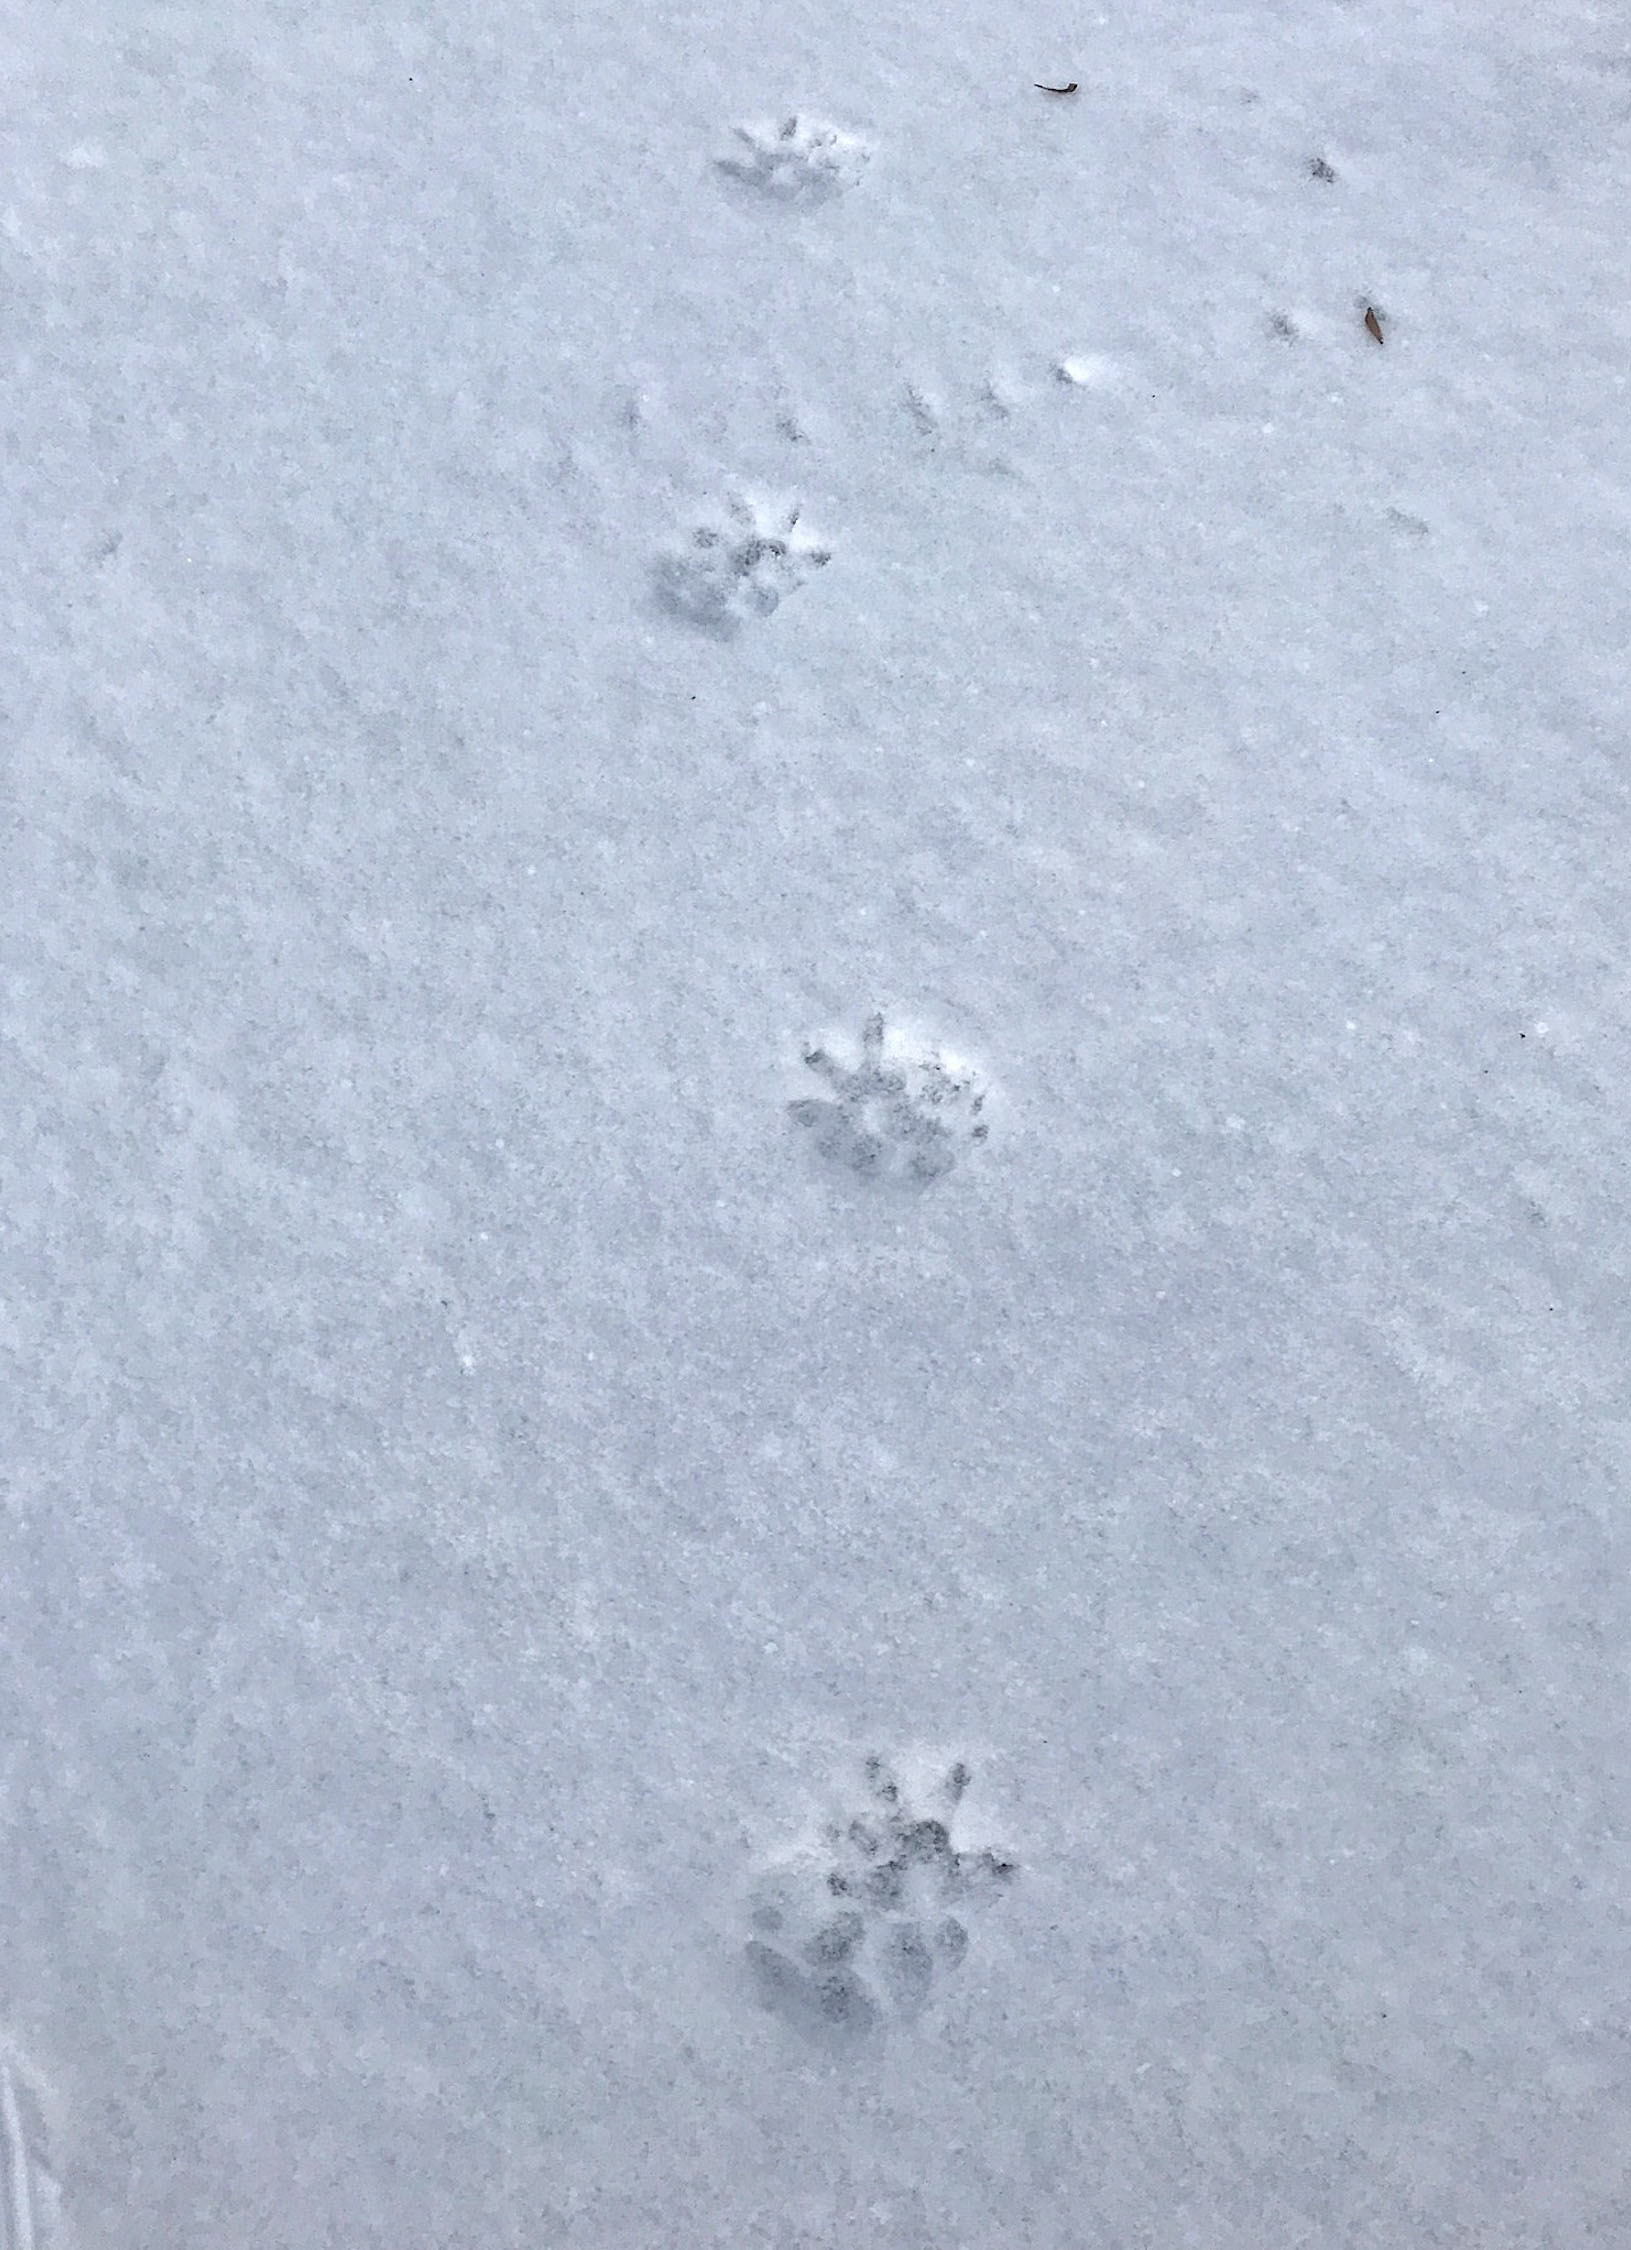 Opossum tracks in a trot pattern with hind feet landing partially on top of the fronts.              Stephane Perreault